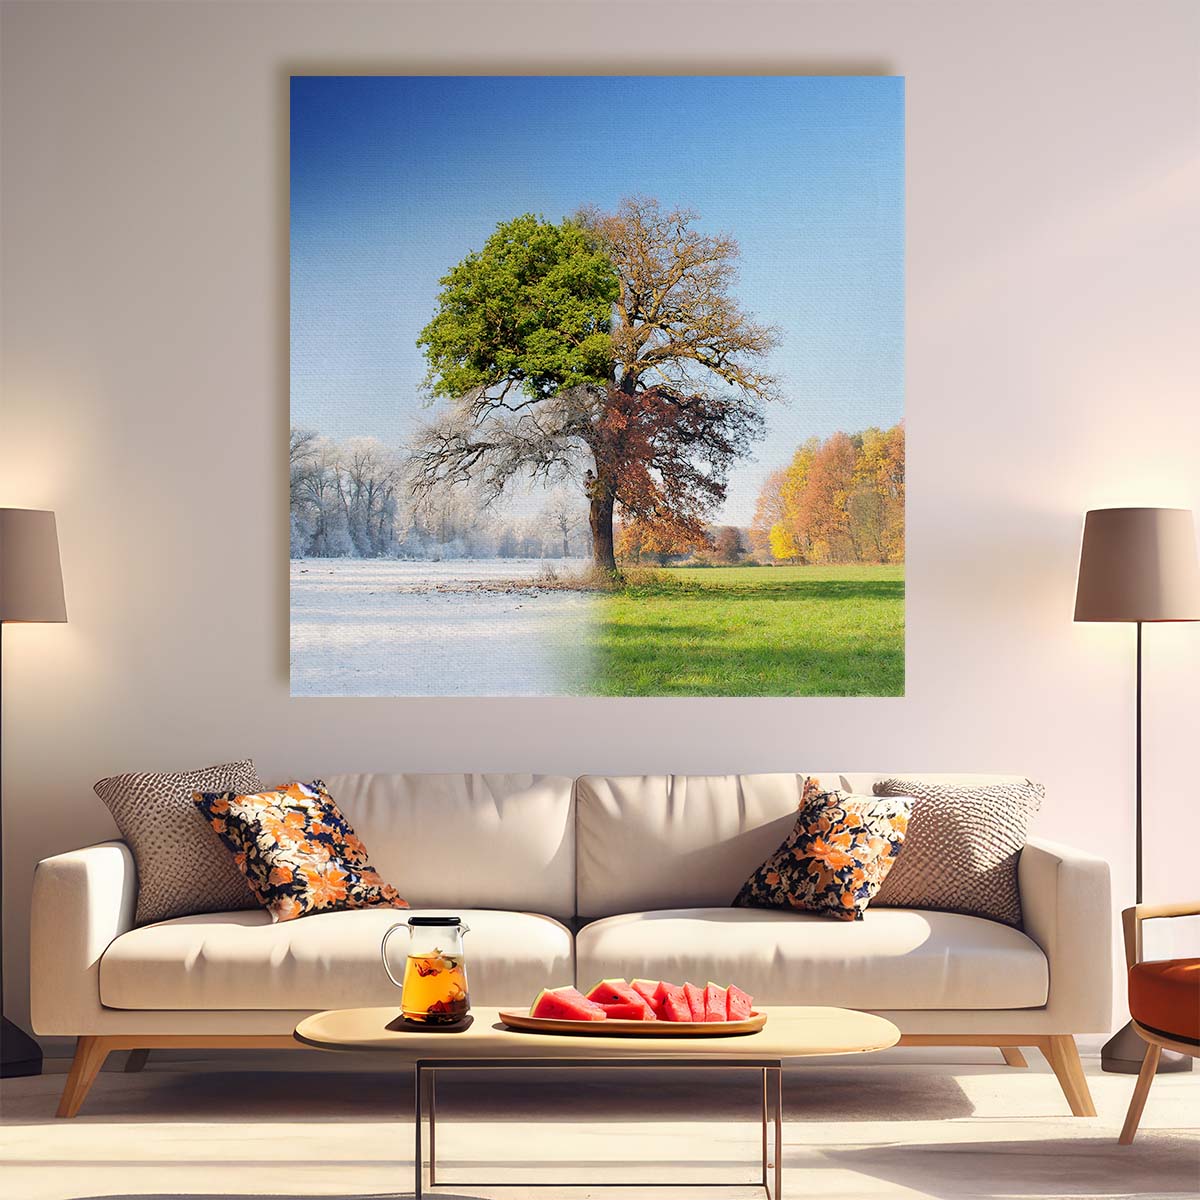 Fantasy Four Seasons Surreal Landscape Photography Wall Art by Luxuriance Designs. Made in USA.